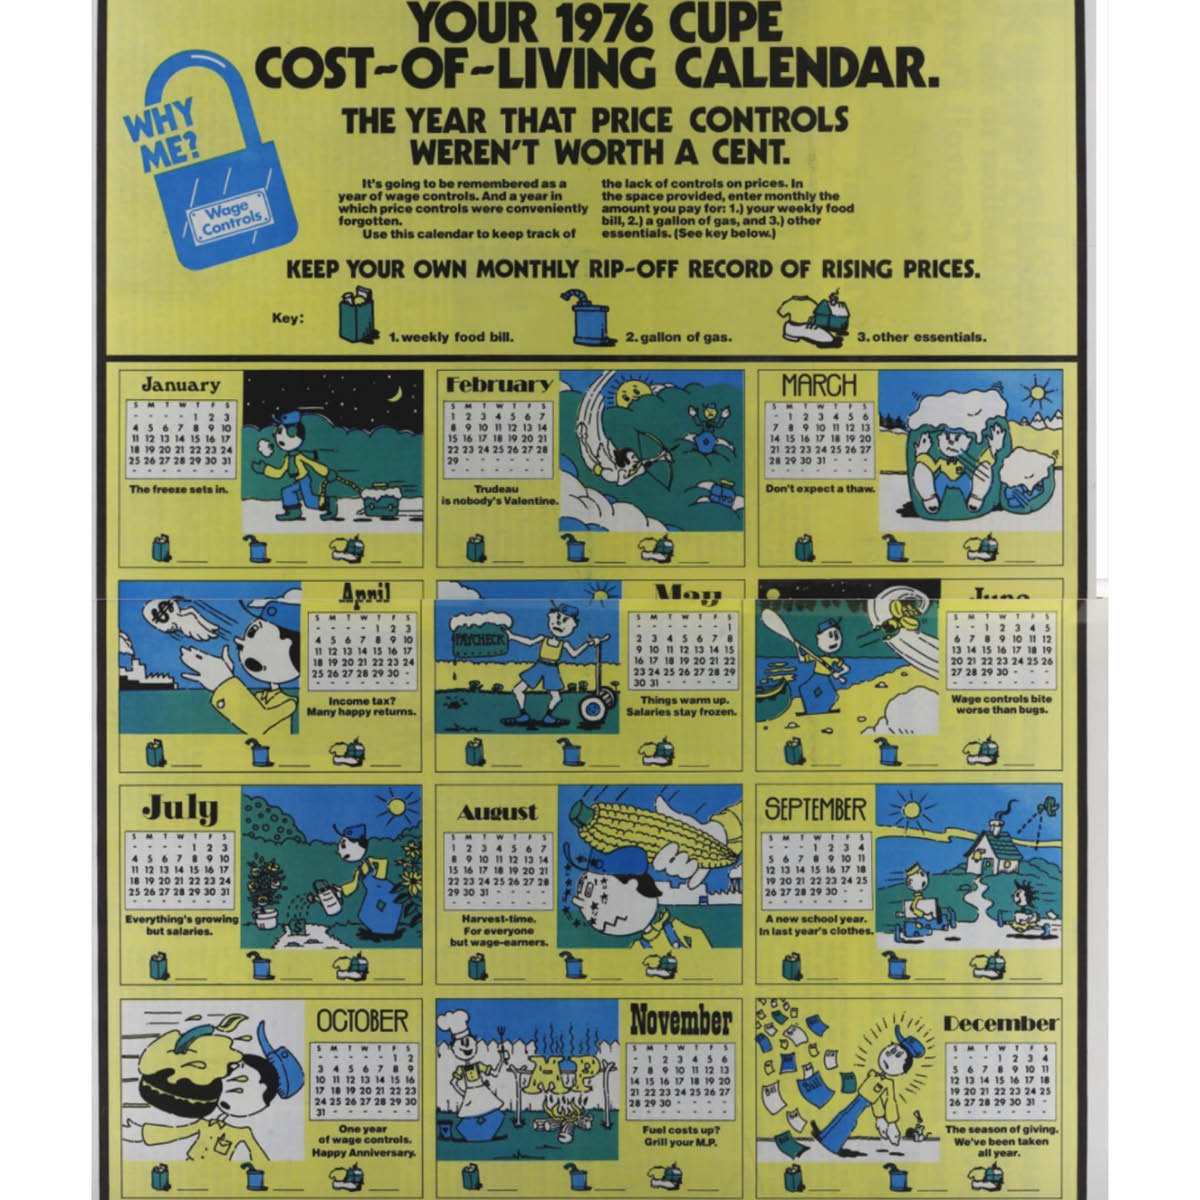 1976 CUPE Cost-of-Living Calendar